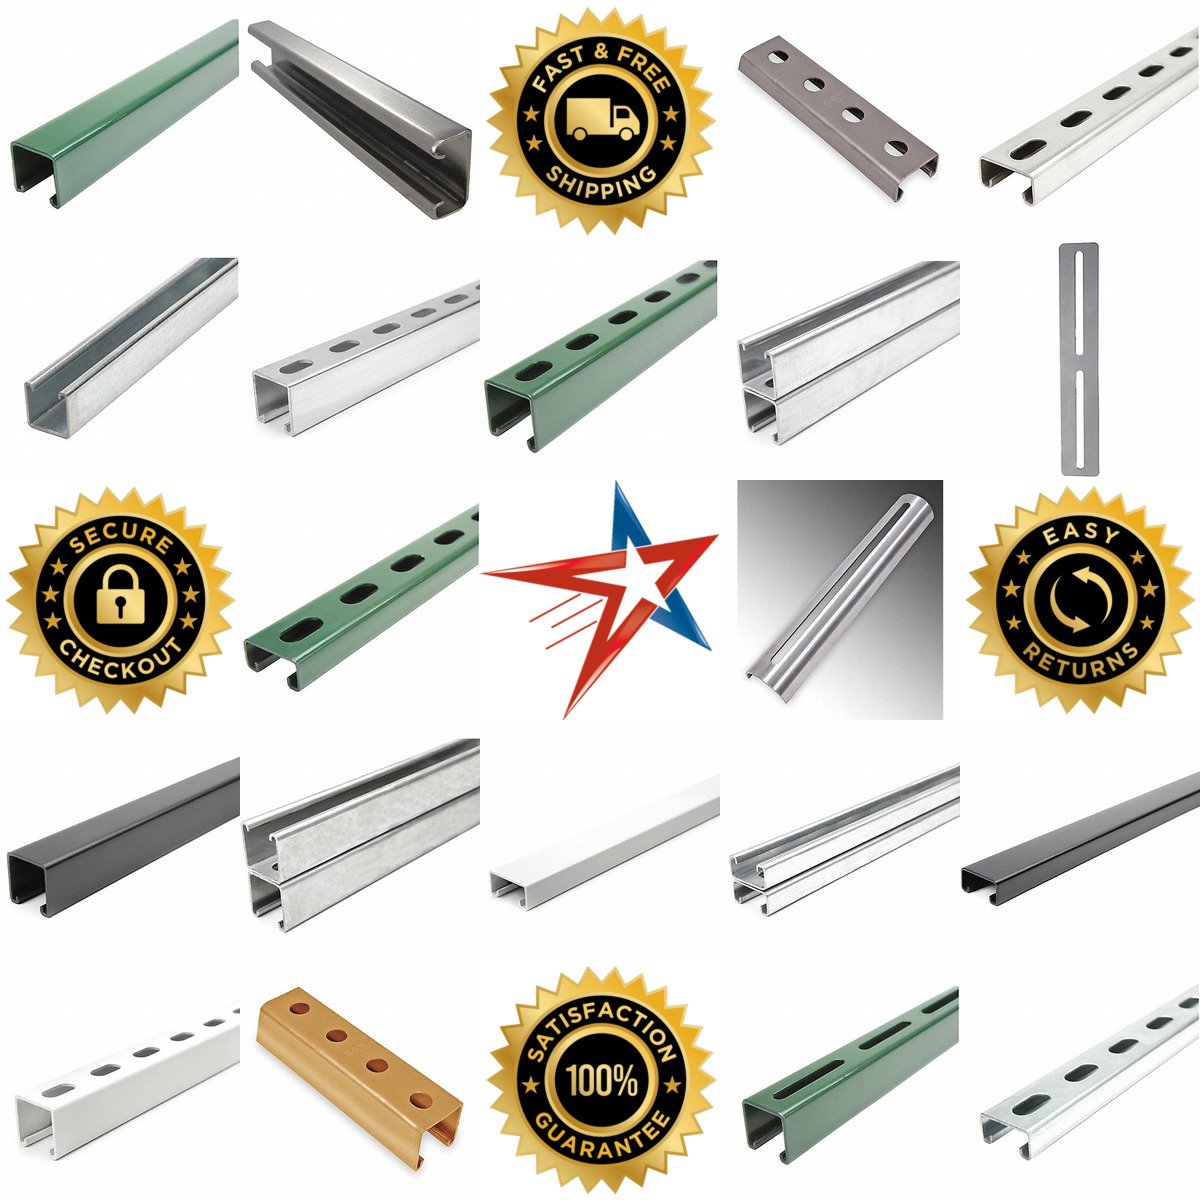 A selection of Strut Channel products on GoVets